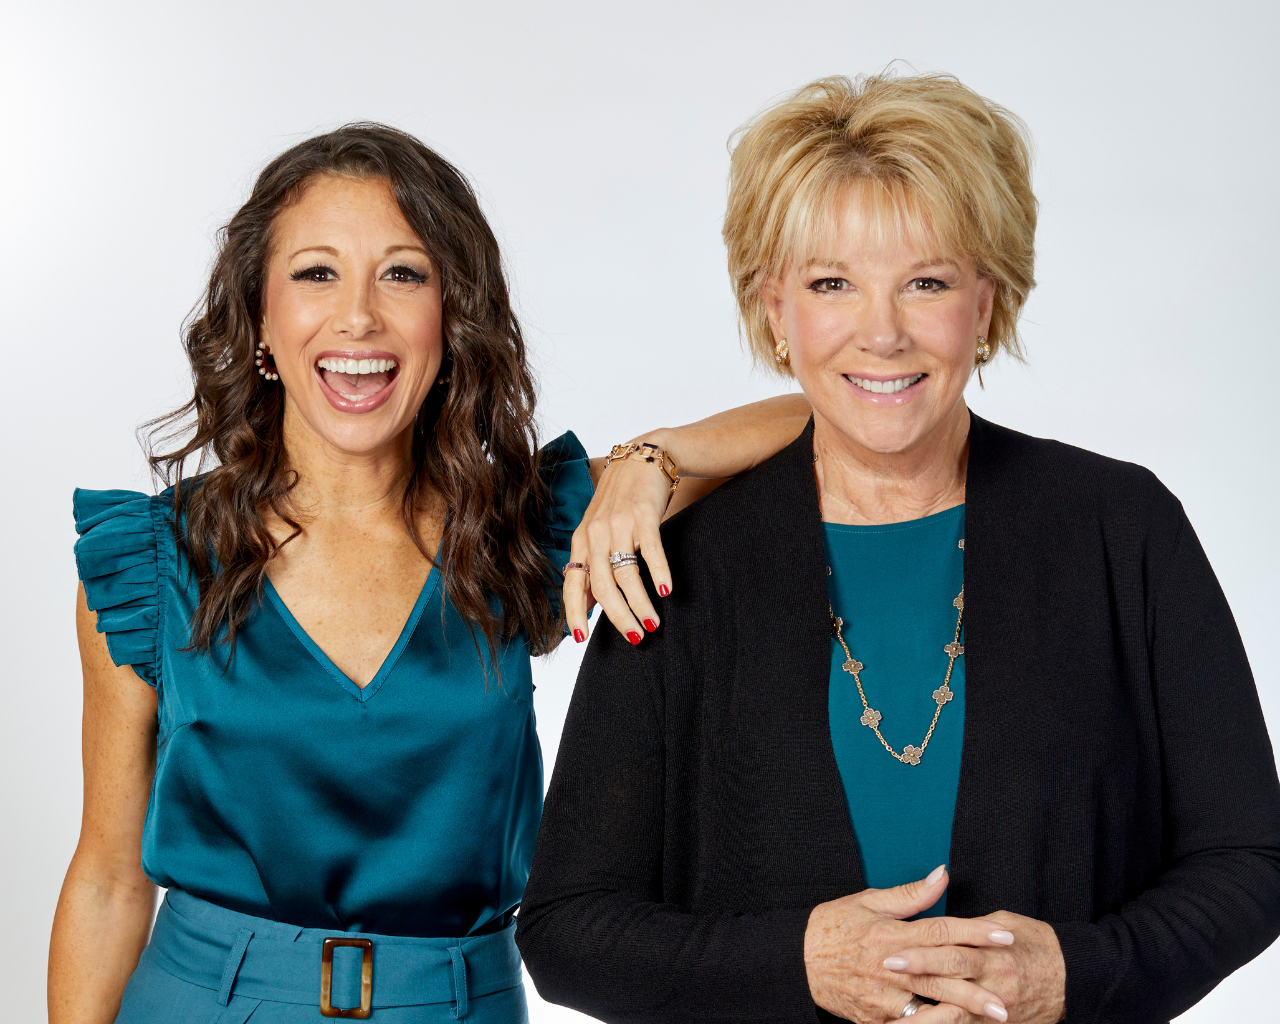 INNOVO Partners with Joan Lunden and Jamie Hess On Women’s Health Educational Initiative